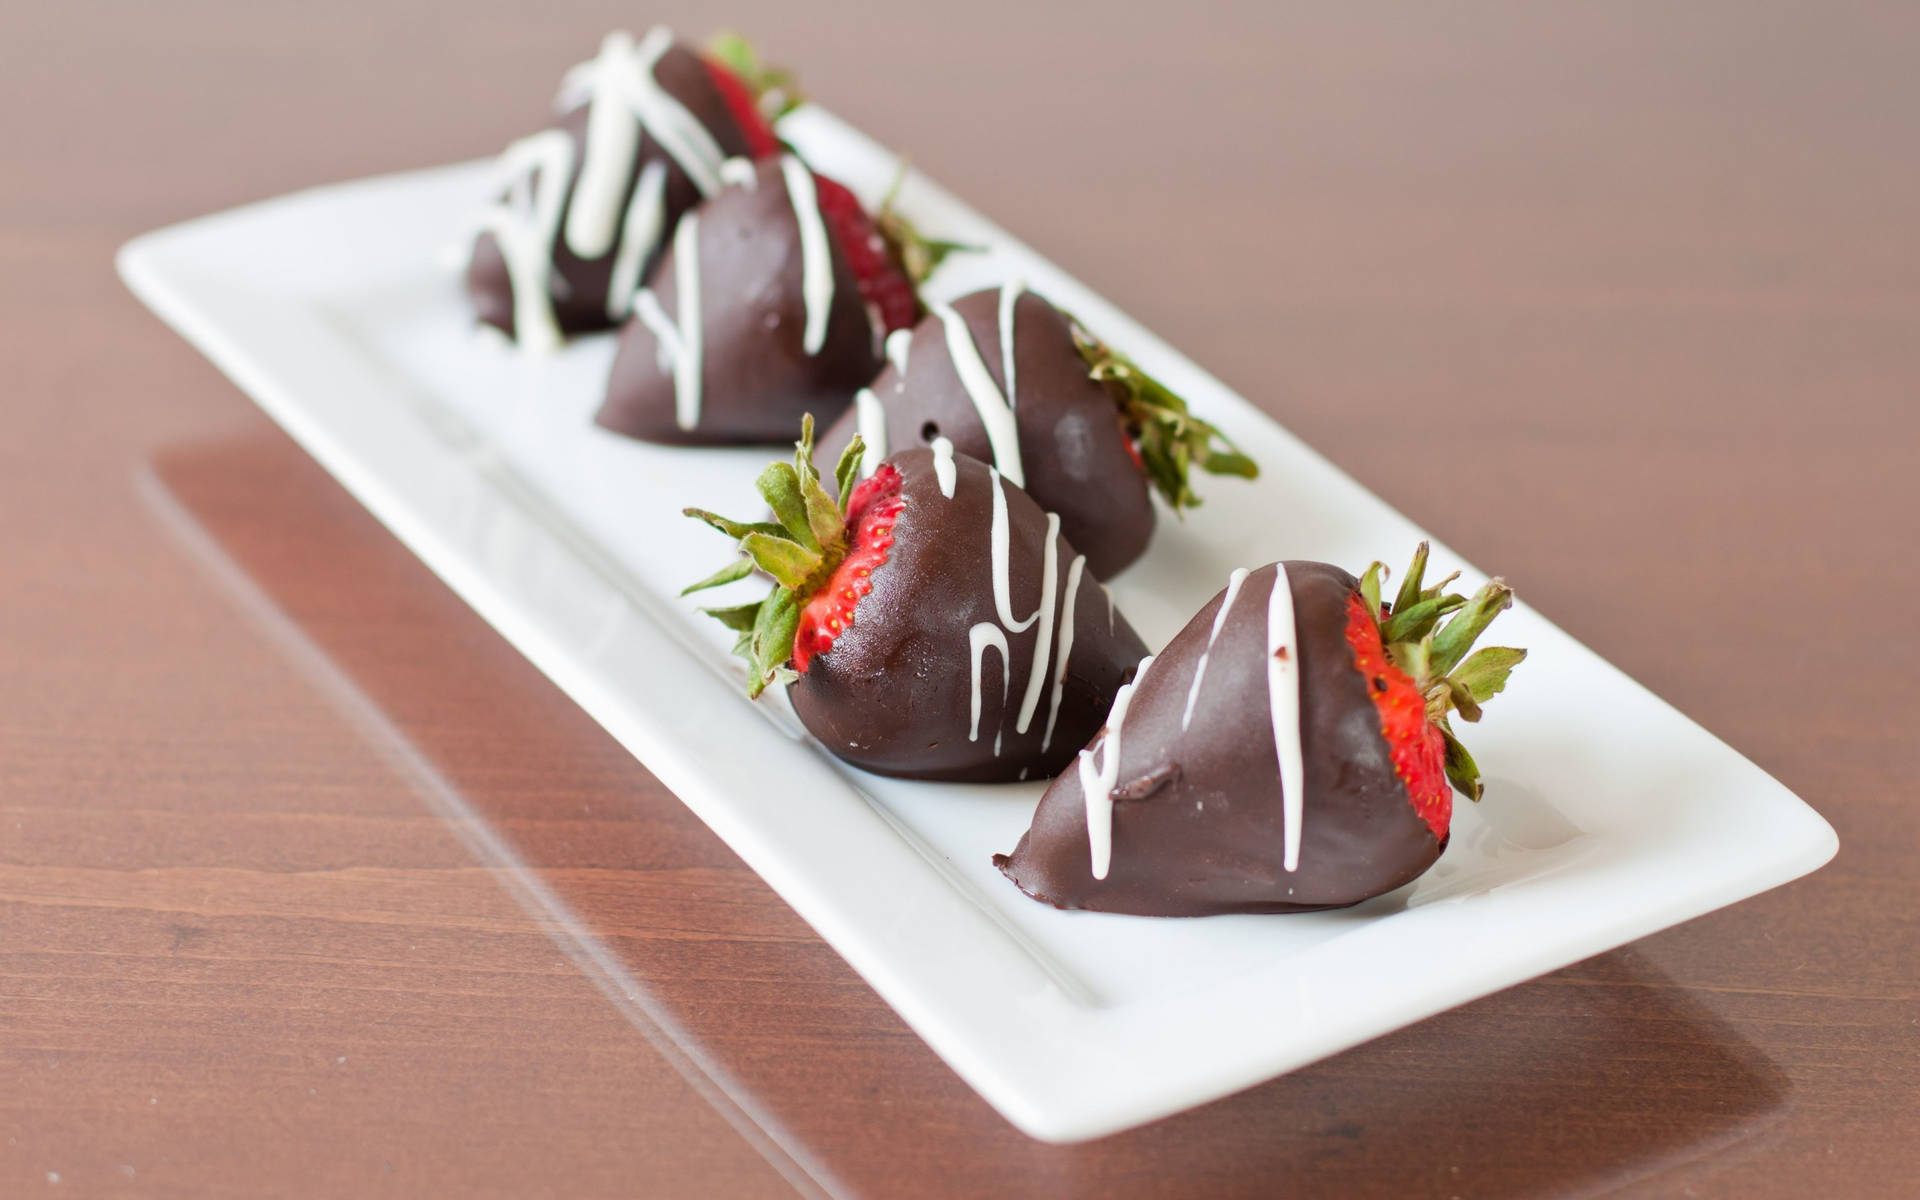 Caption: Delightful Chocolate Dipped Strawberries